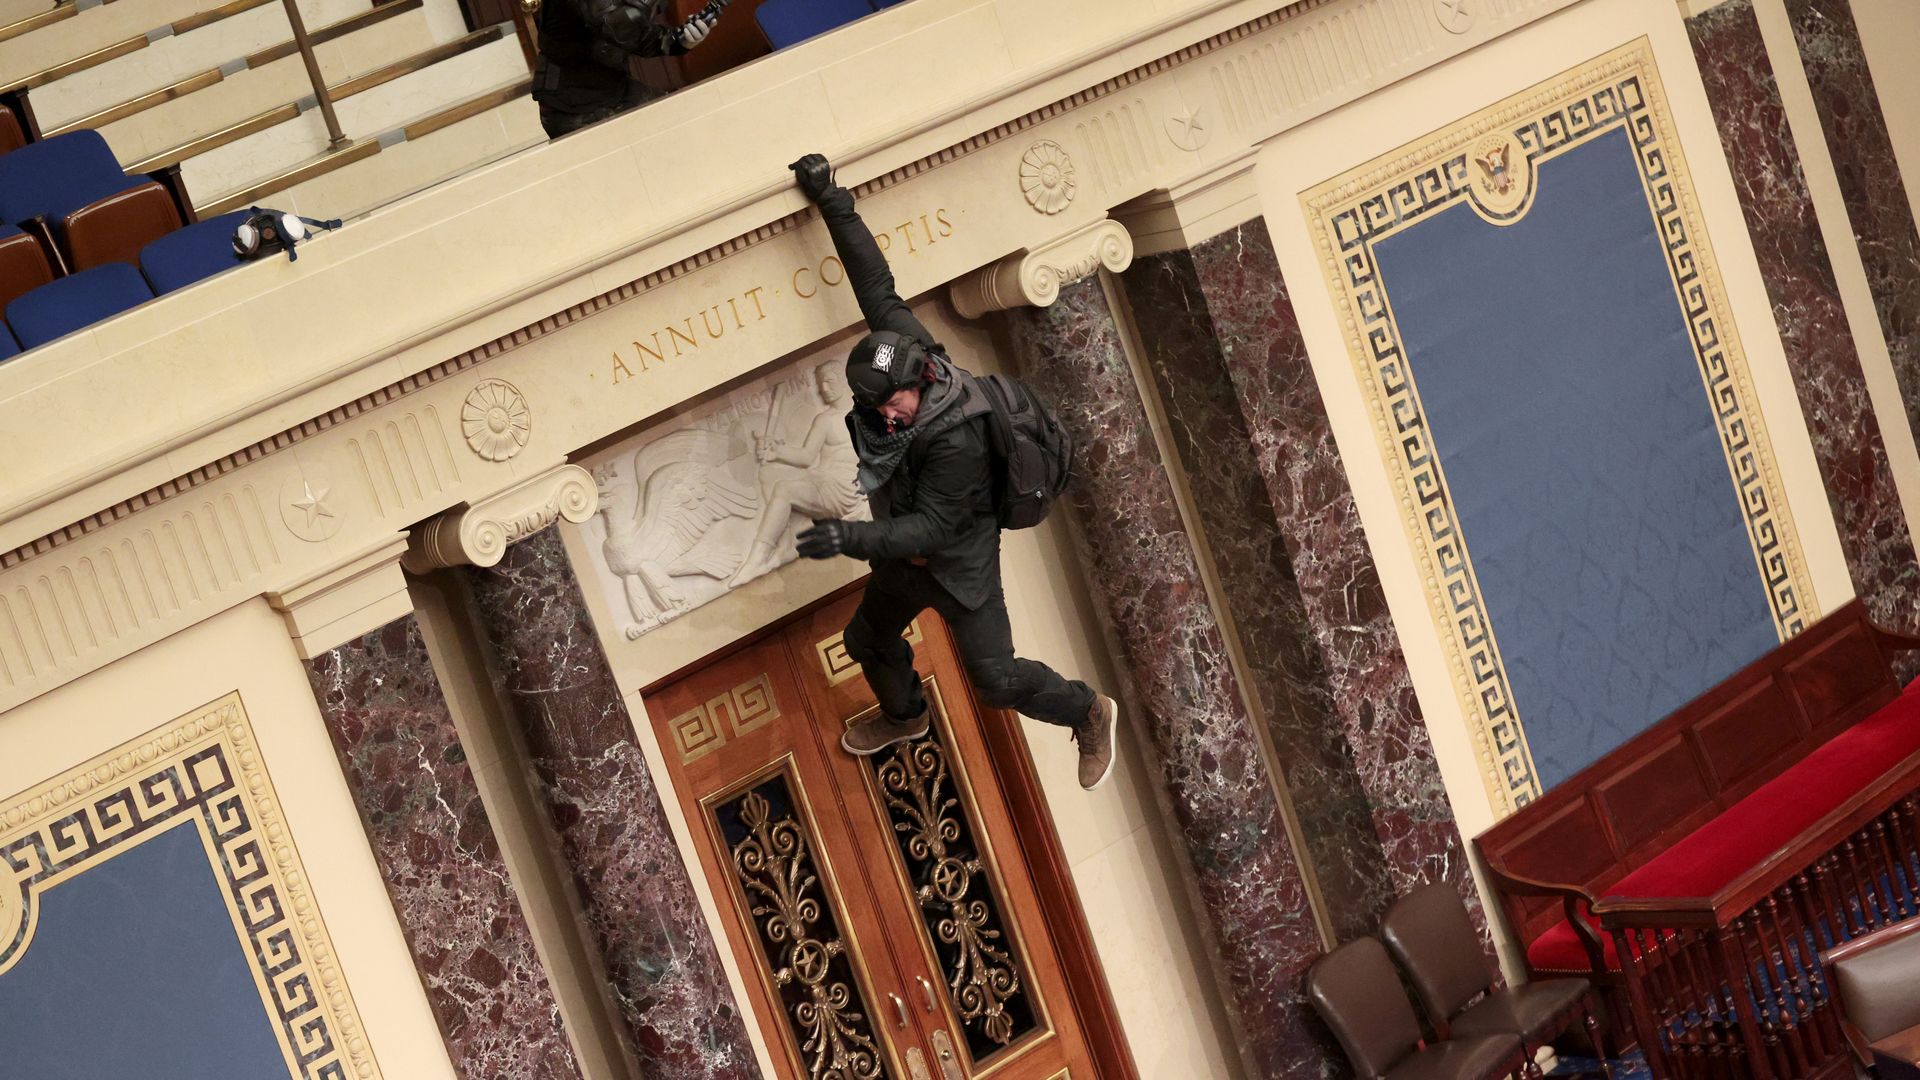 A protestor is seen hanging from the balcony in the U.S. Senate chamber during the Jan. 6 assault.